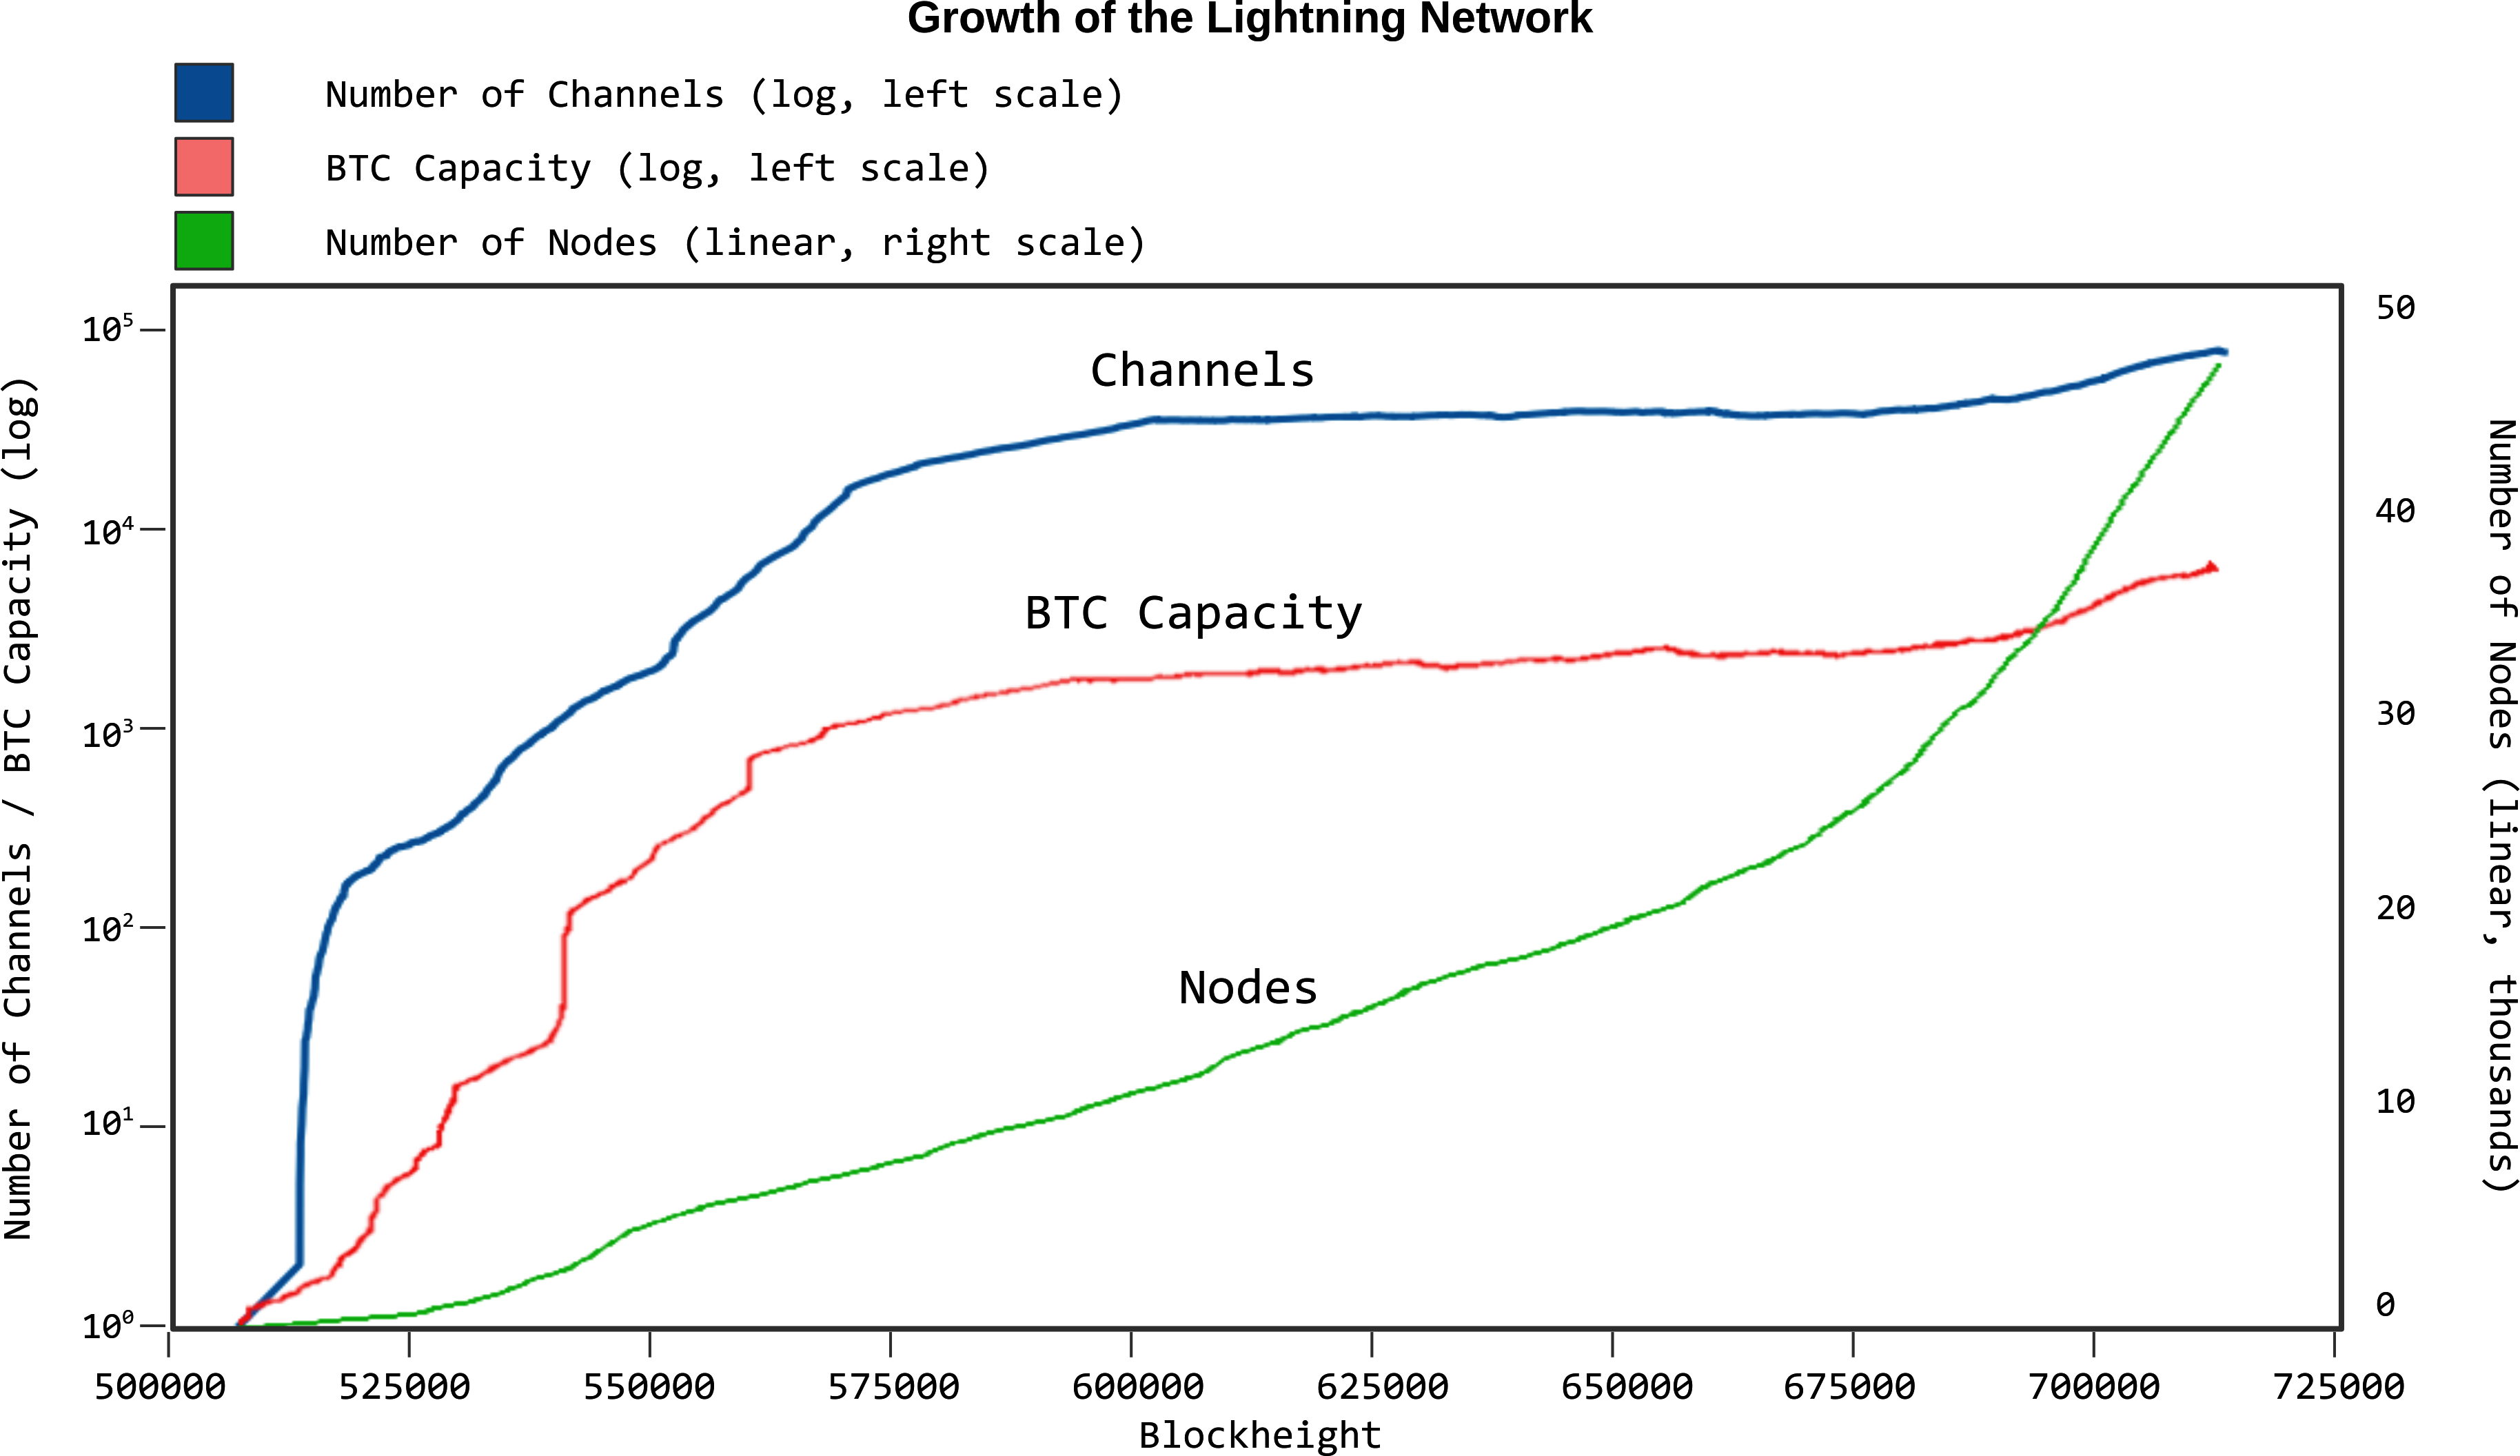 The steady growth of the Lightning Network in terms of nodes, channels, and locked capacity (as of September 2021)